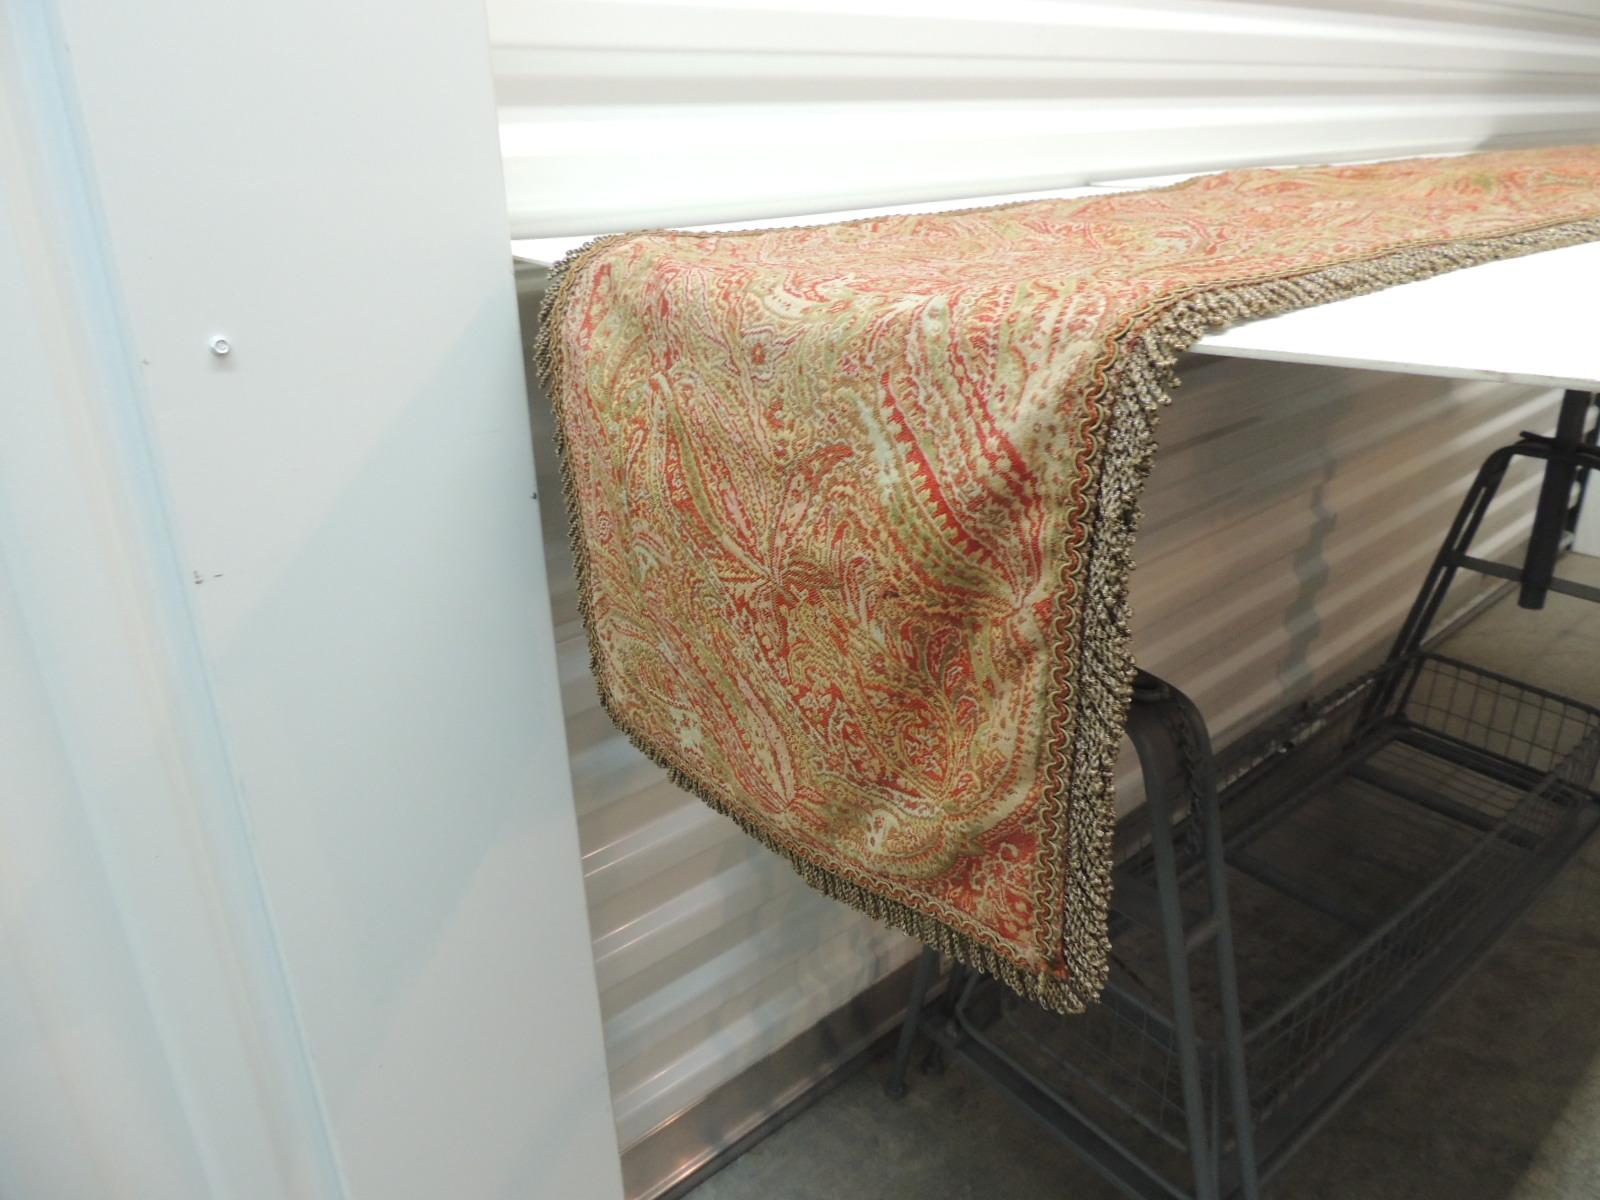 Hand-Crafted Kashmir Paisley Red and Orange Table Runner